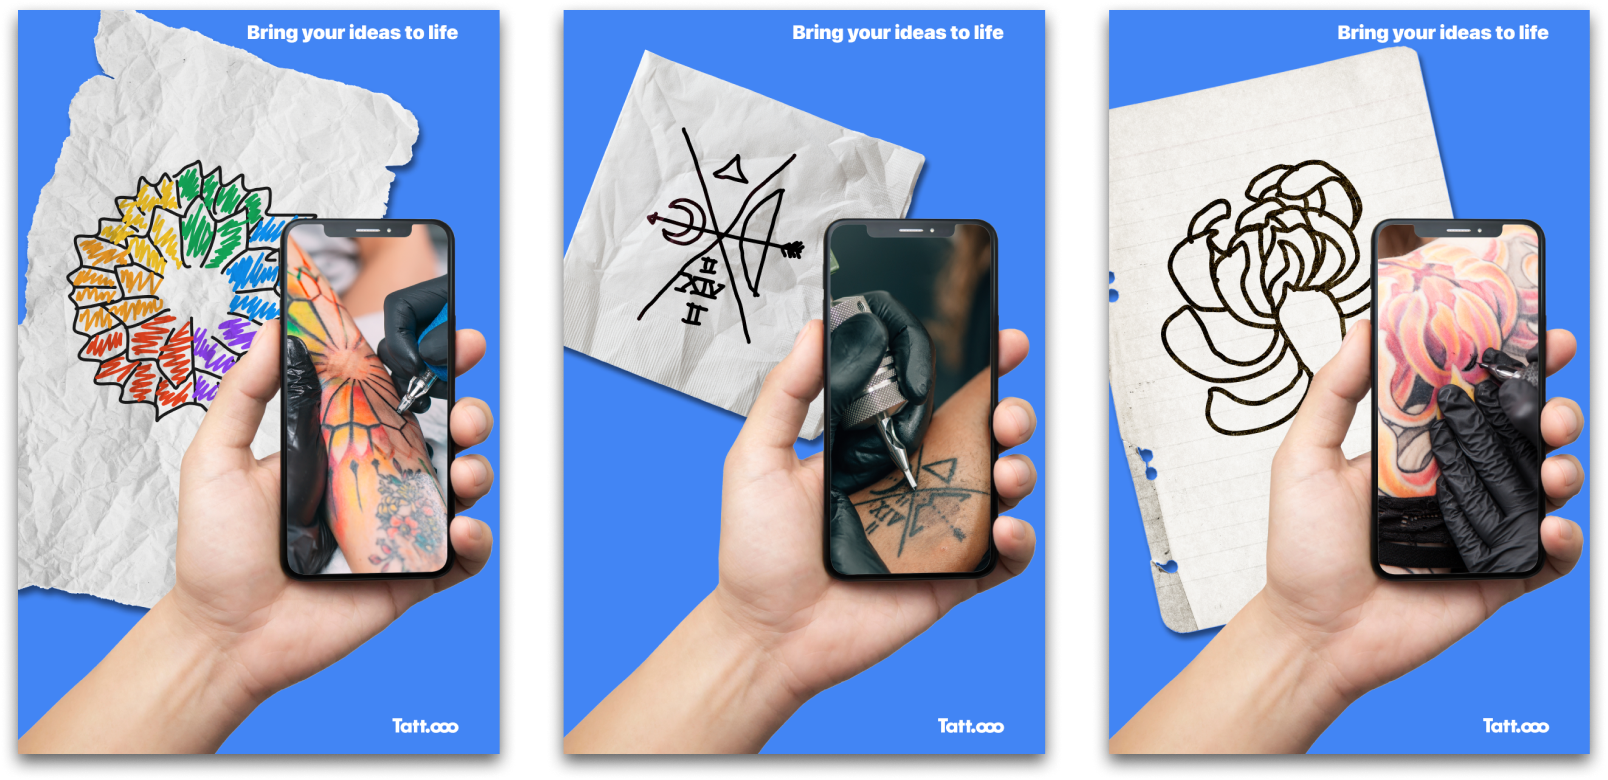 A series of posters that takes the branding elements and reuses them to market the app with the slogan, 'Bring your ideas to life'.